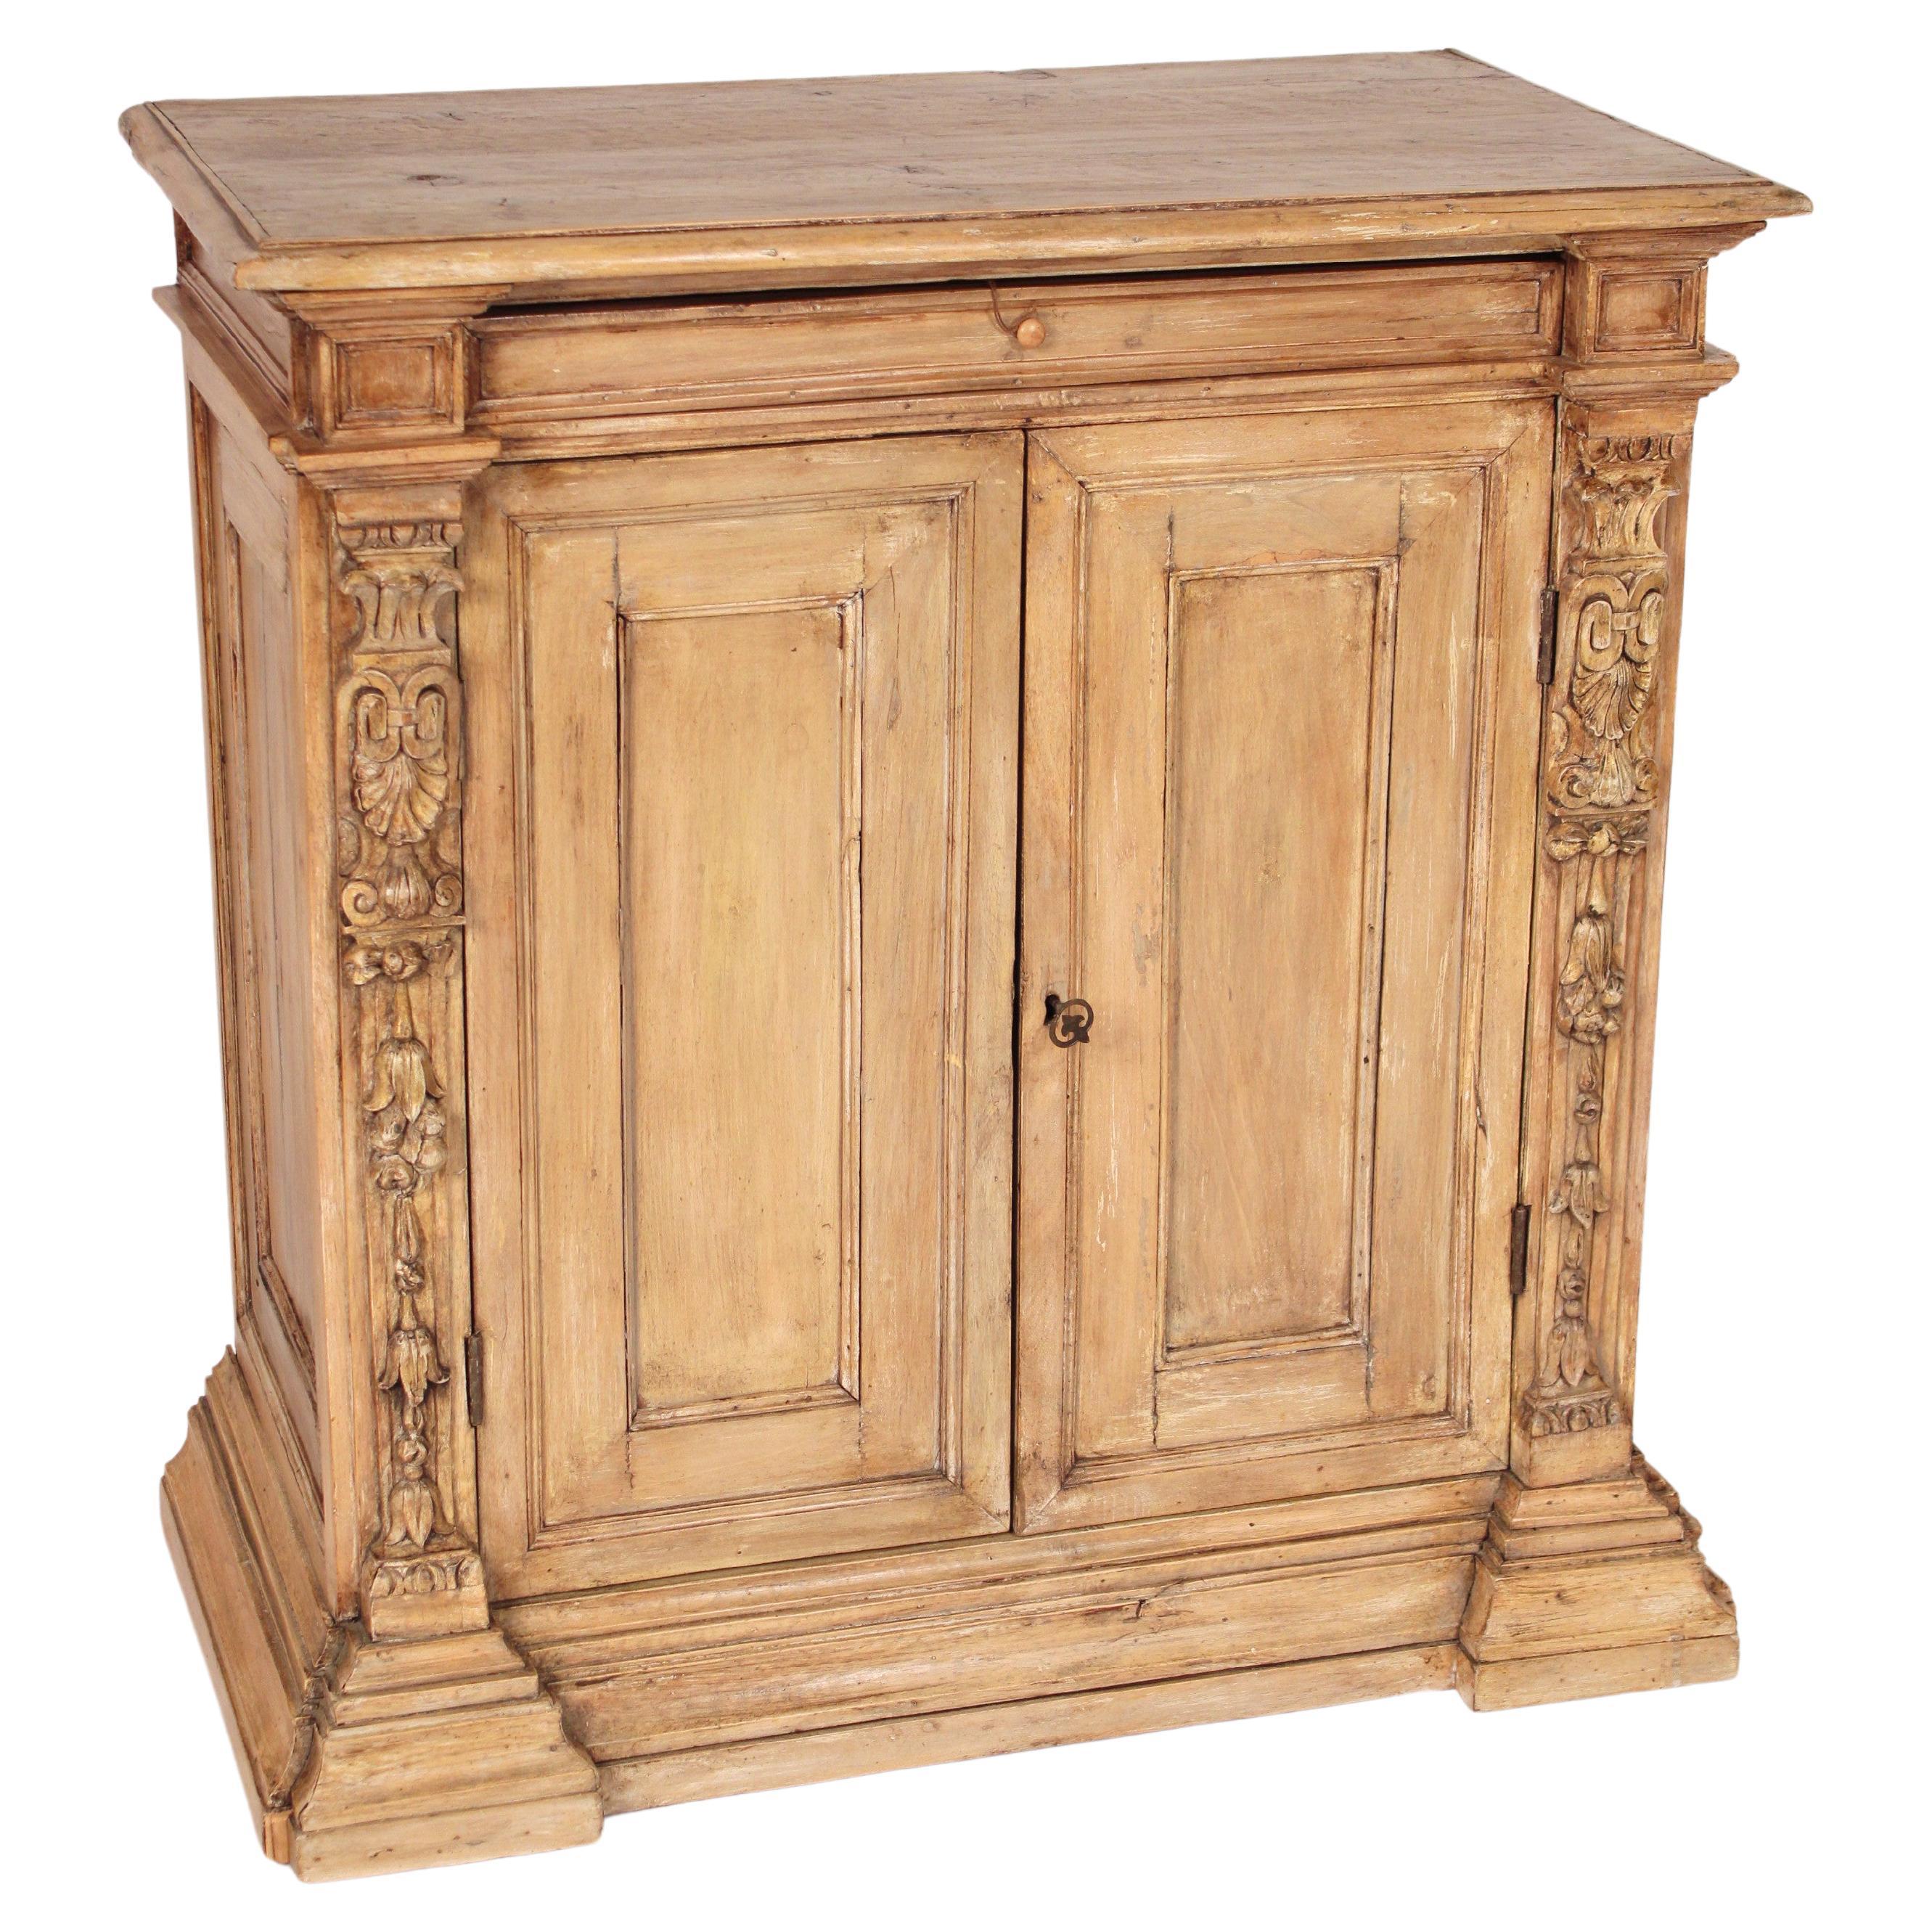 Antique Baroque Style Continental Pickled Cabinet For Sale at 1stDibs